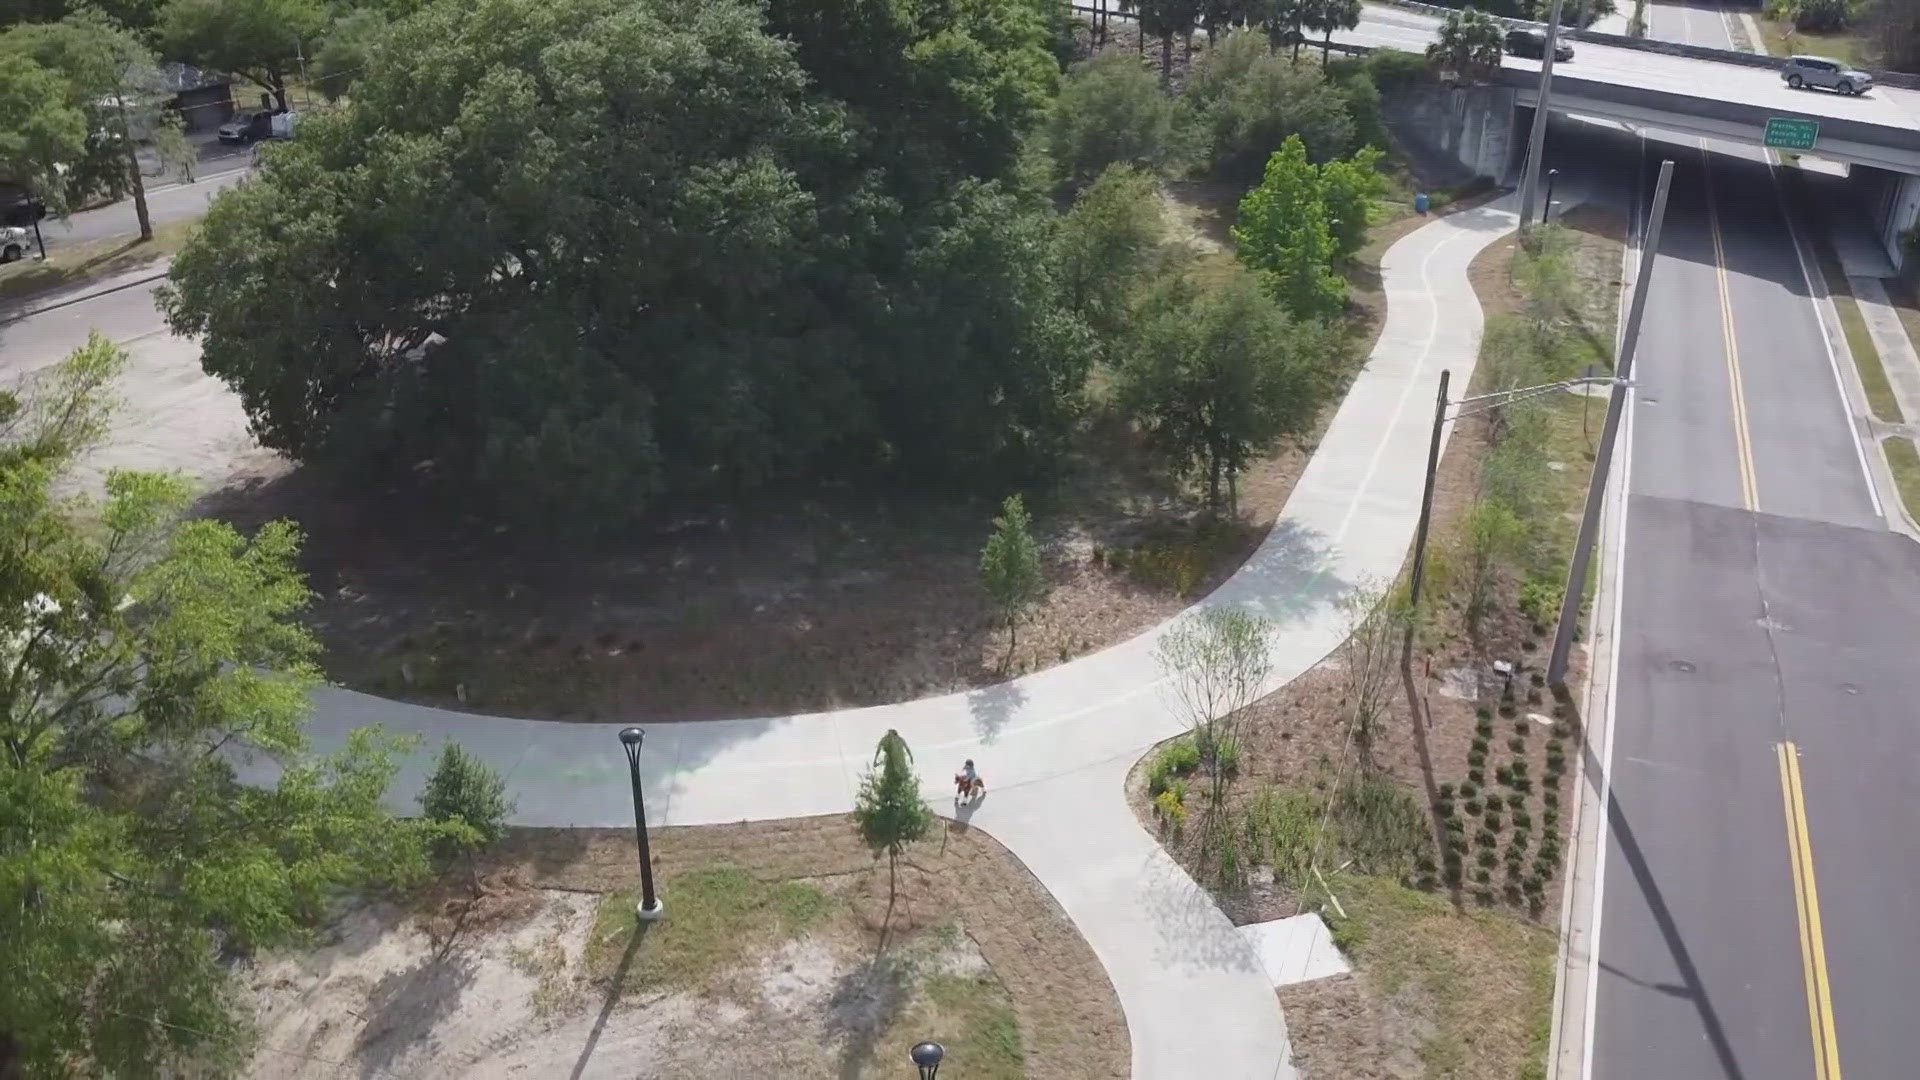 Jacksonville city leaders are hoping to have the full 30 miles of the Emerald Trail done by 2029.